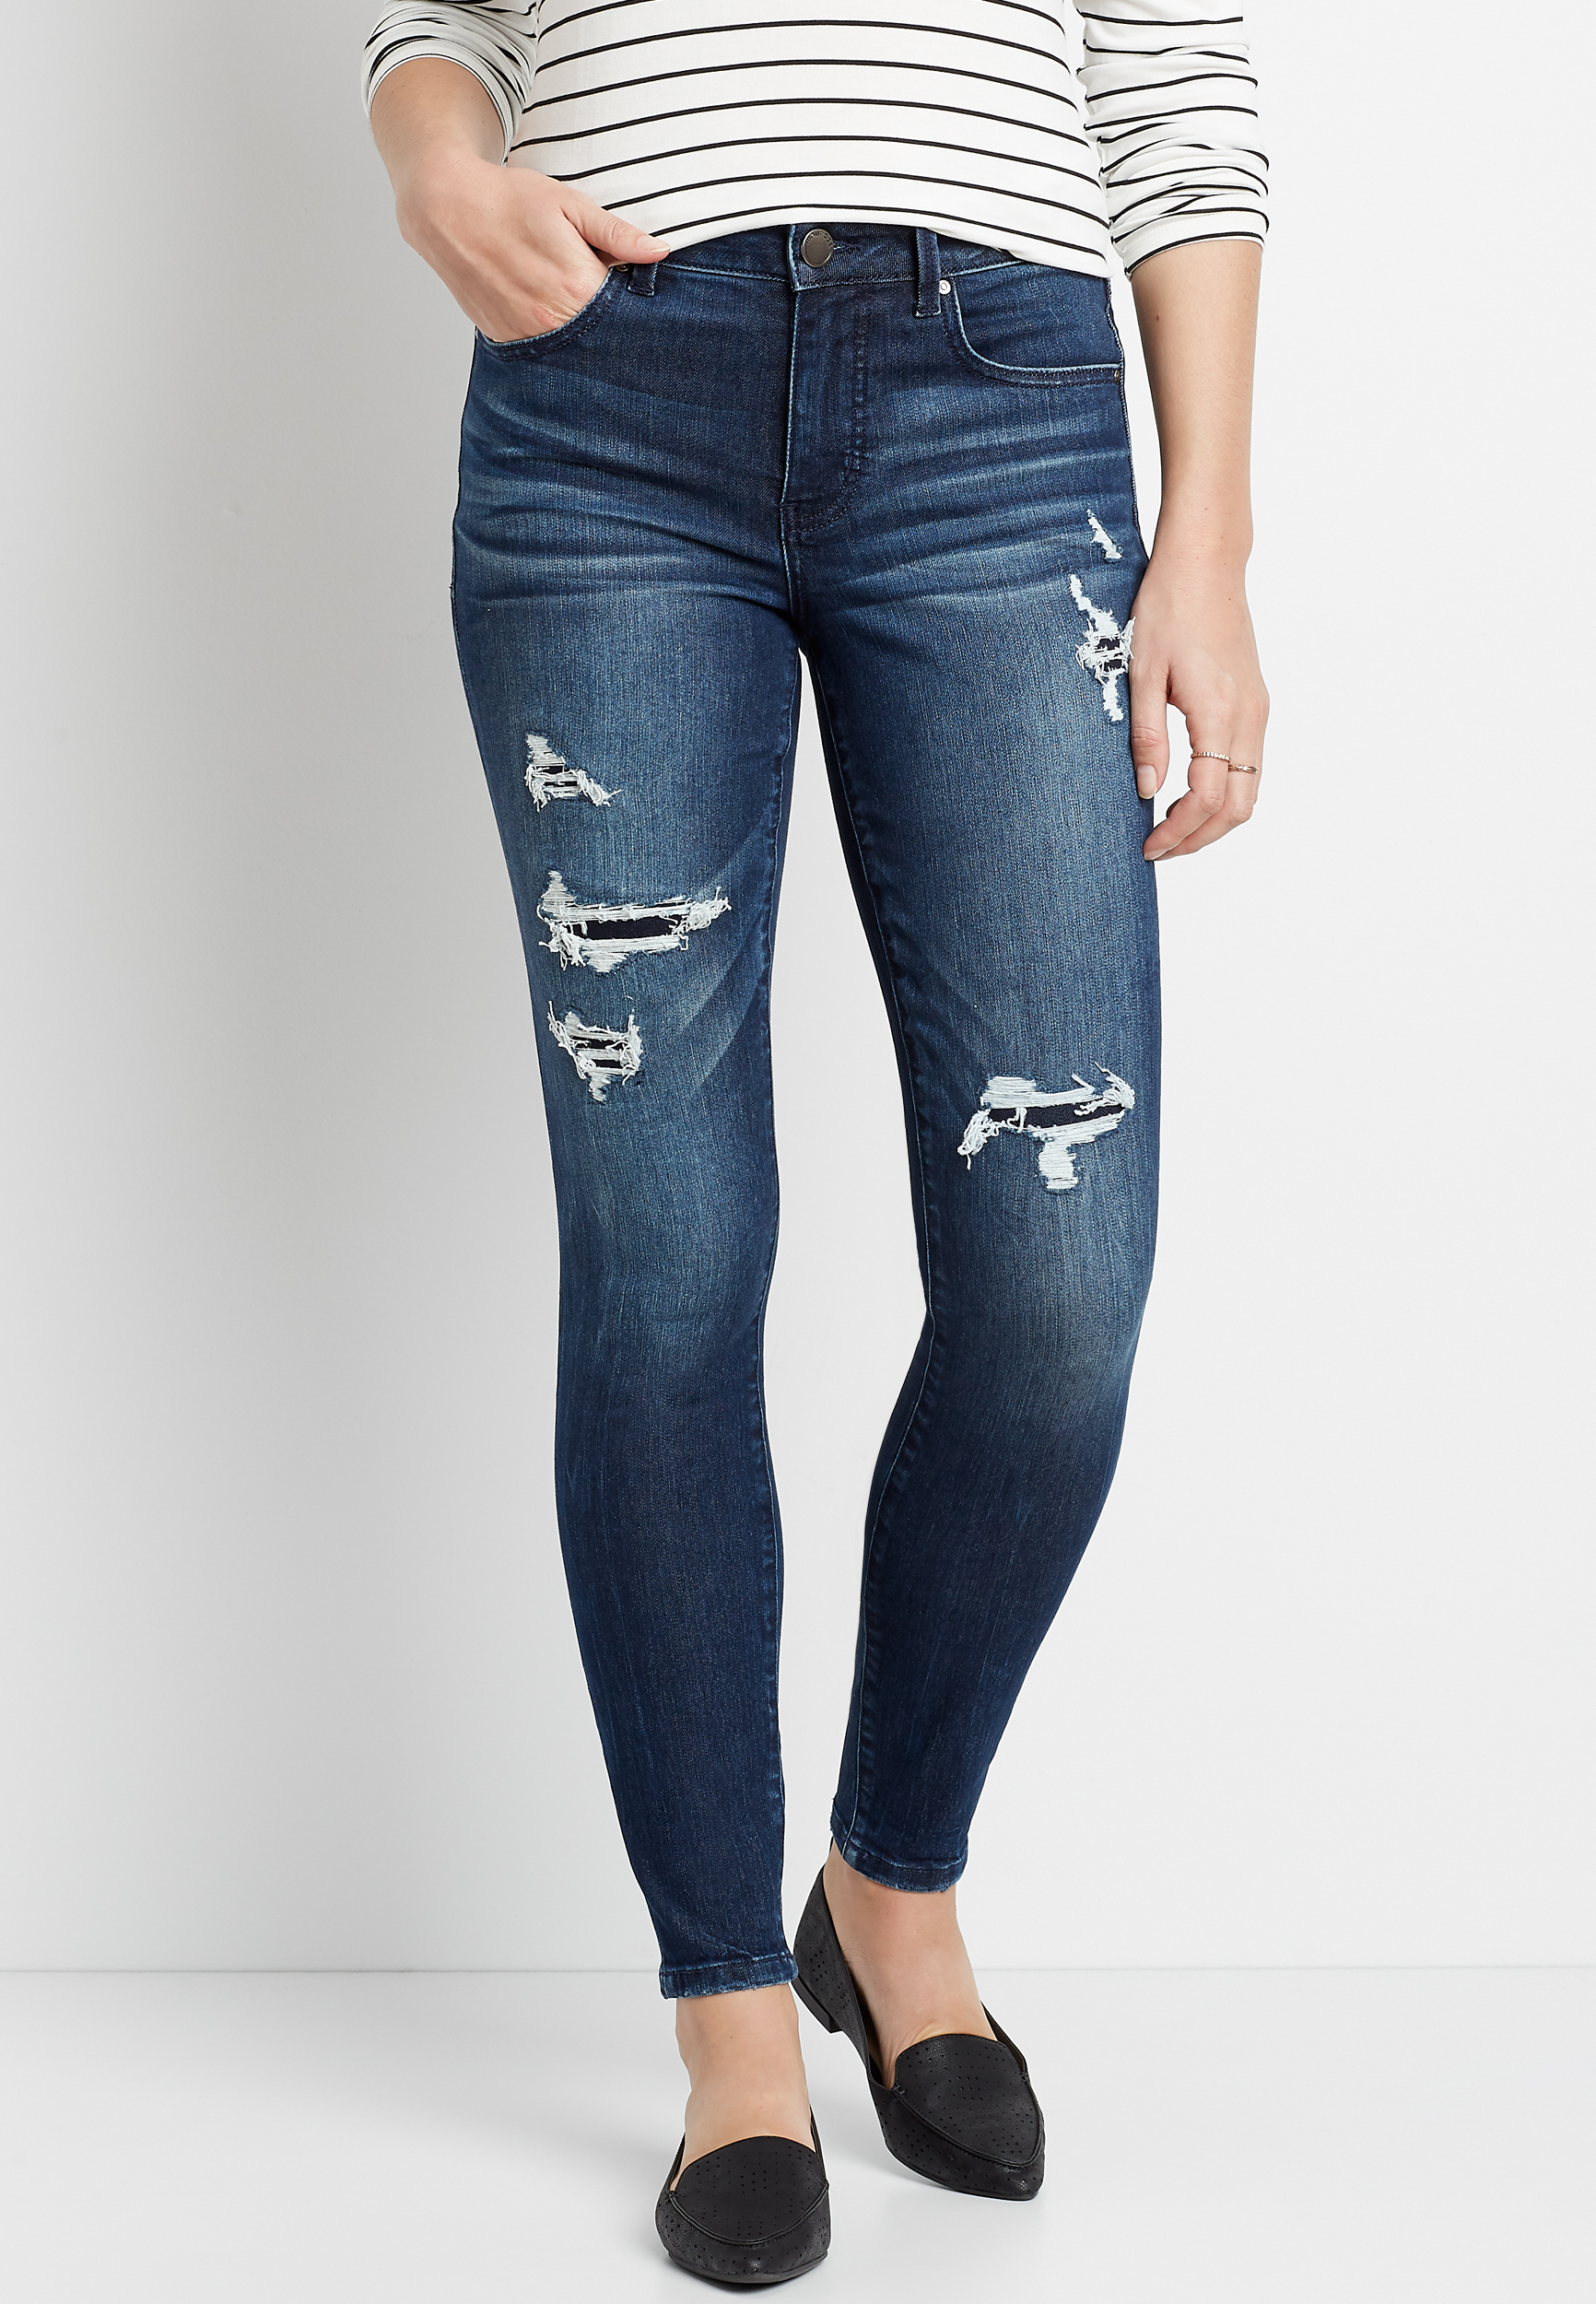 Everflex™ High Rise Dark Backed Destructed Skinny Jean | maurices